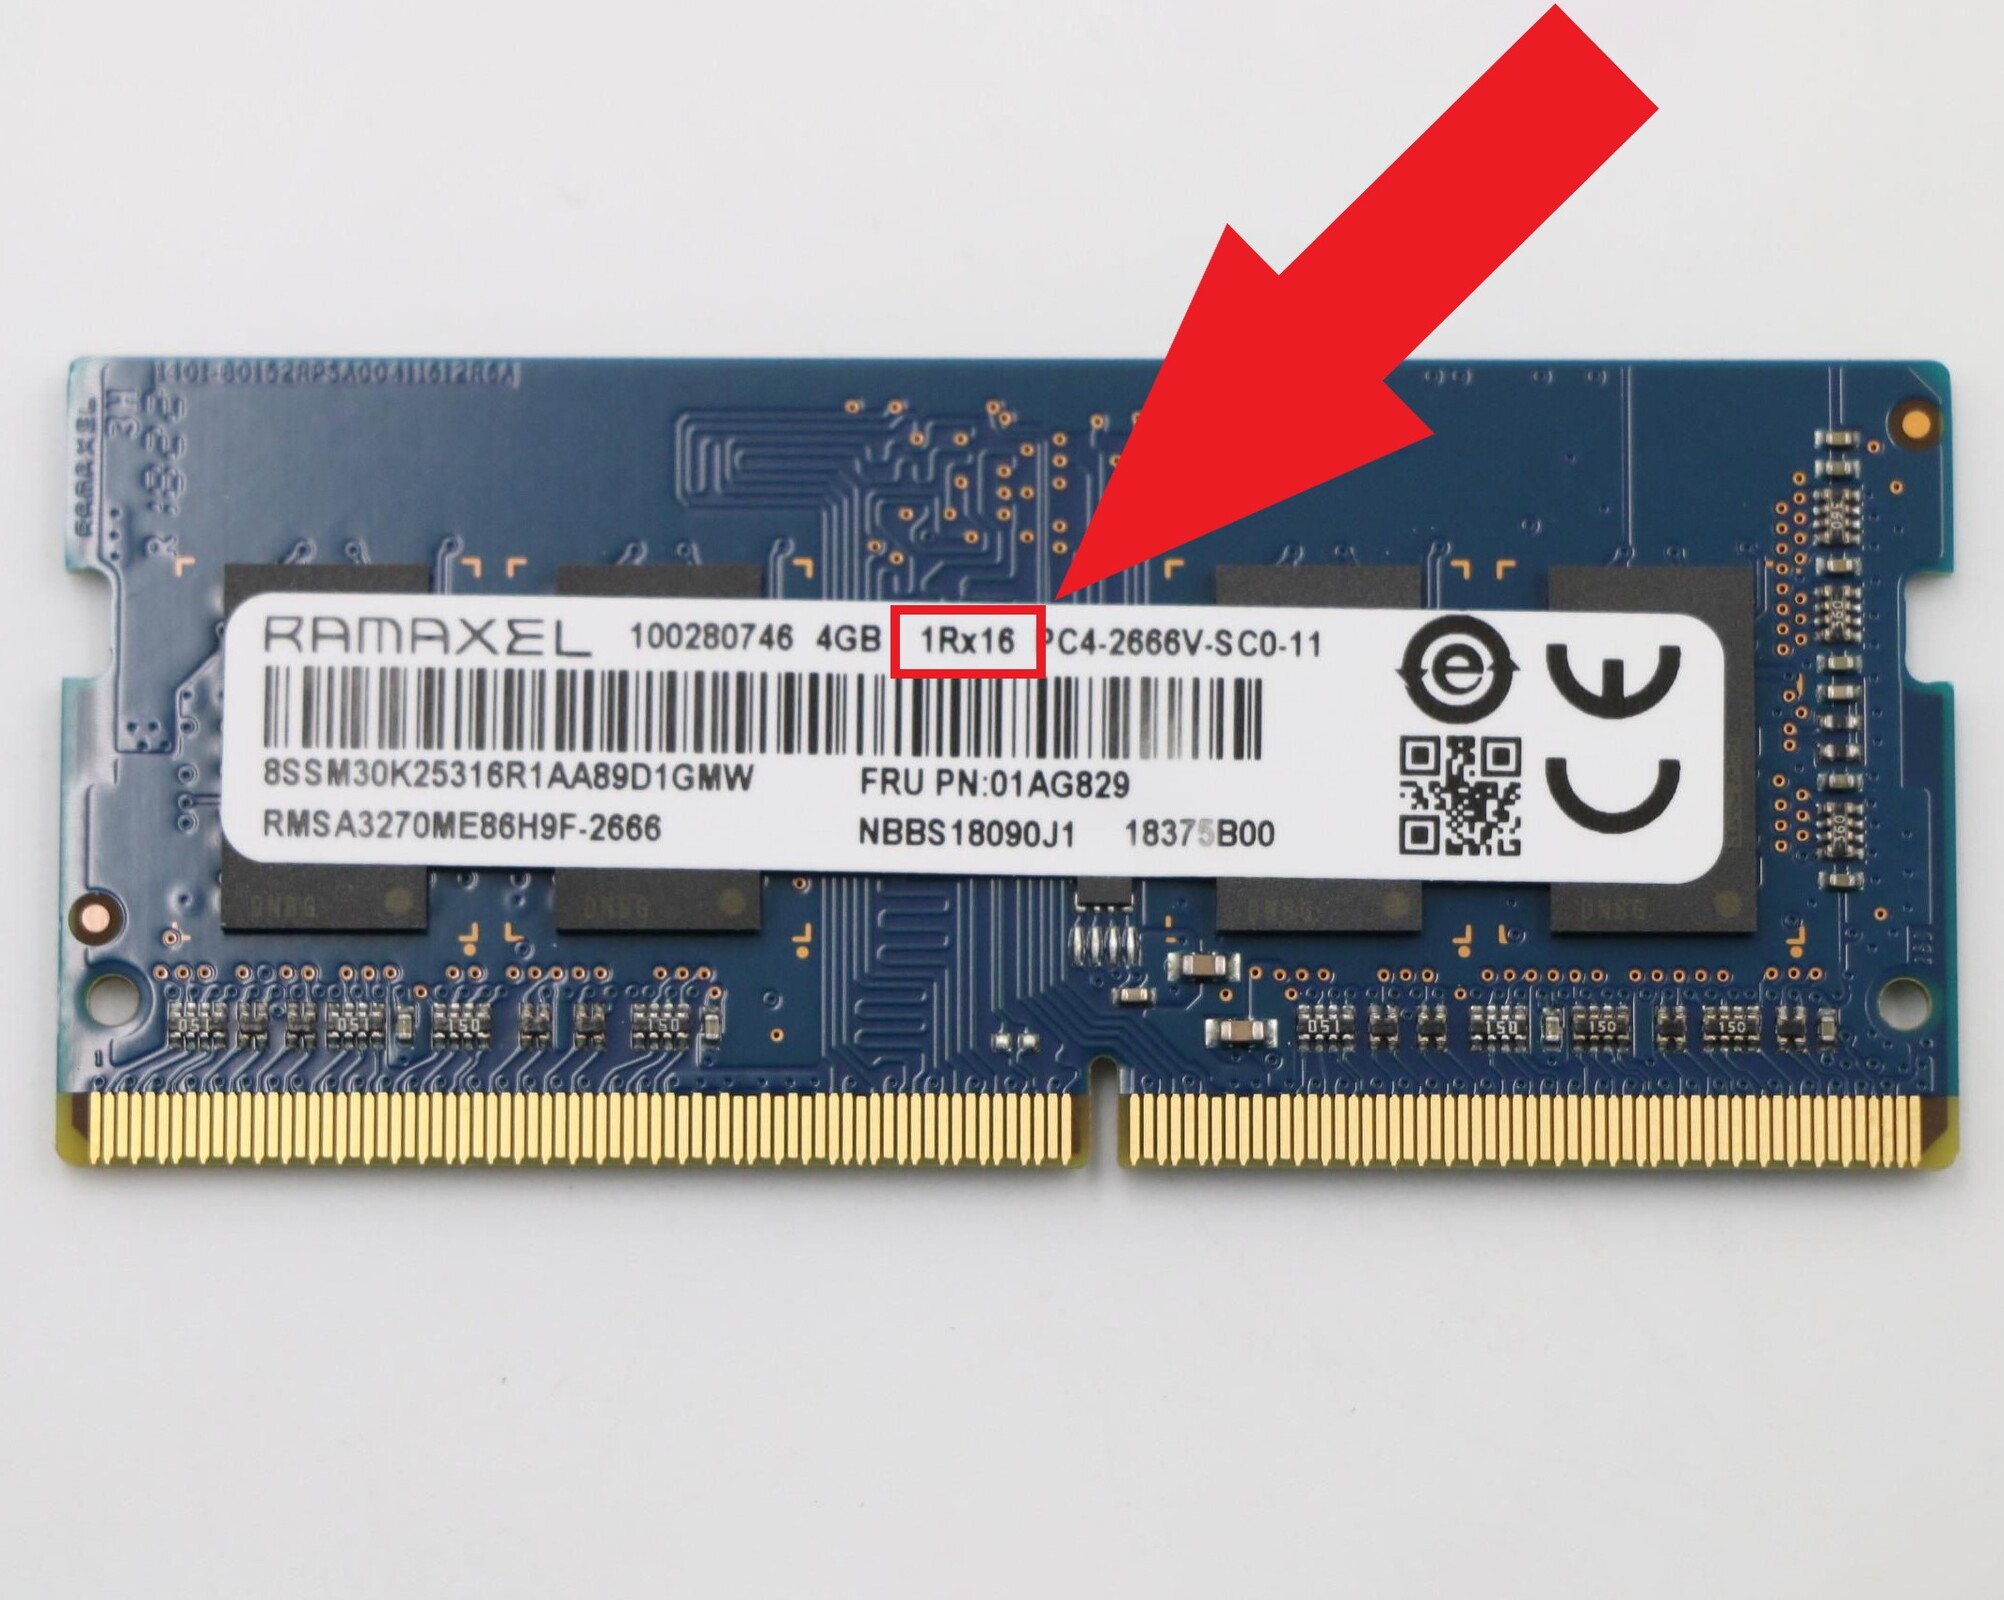 Beware of the single rank x16 RAM kits sneaked in laptop models! The 1Rx16 modules significantly lower bandwidth compared to the variants - NotebookCheck.net News